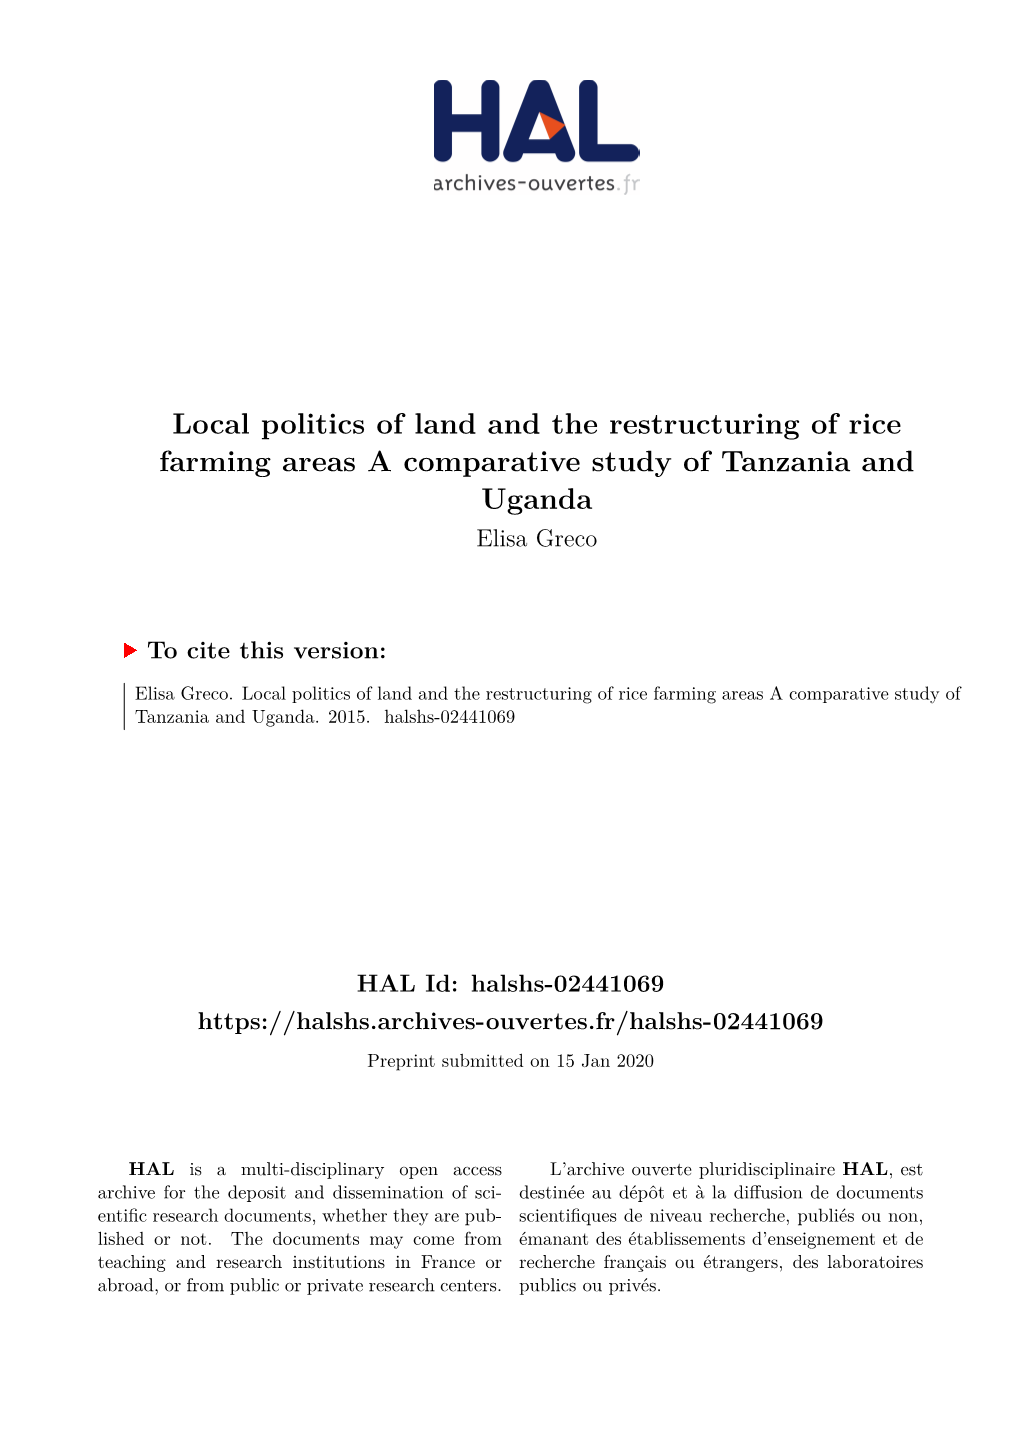 Local Politics of Land and the Restructuring of Rice Farming Areas a Comparative Study of Tanzania and Uganda Elisa Greco